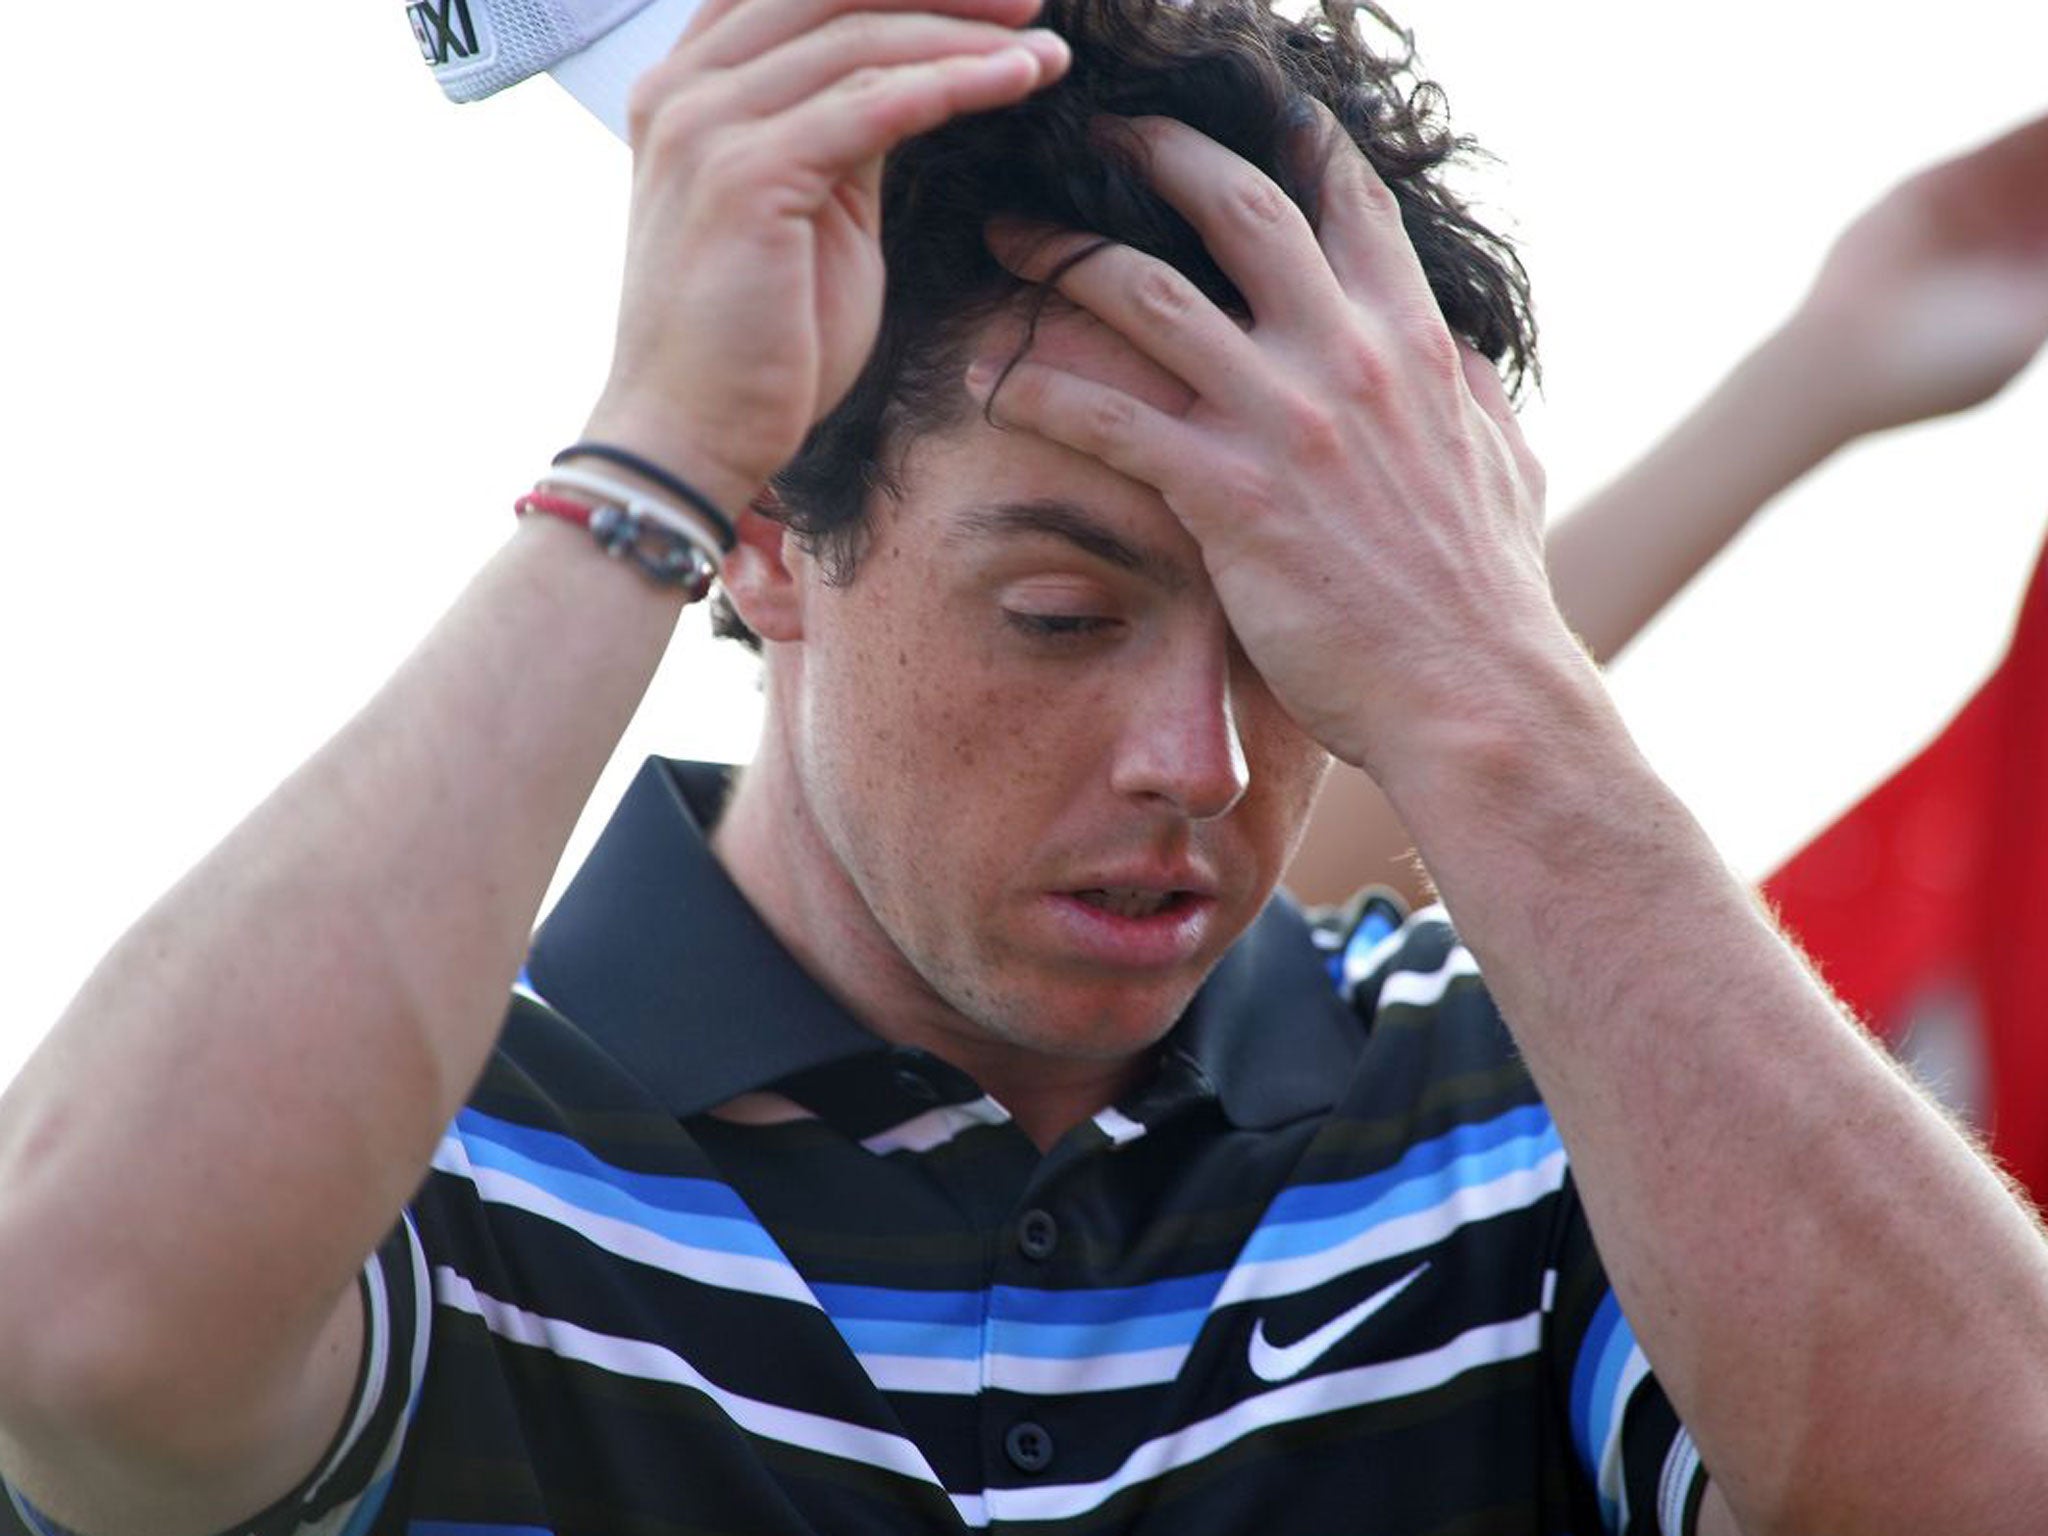 Rory McIlroy reacts after recording another bogey on the 18th